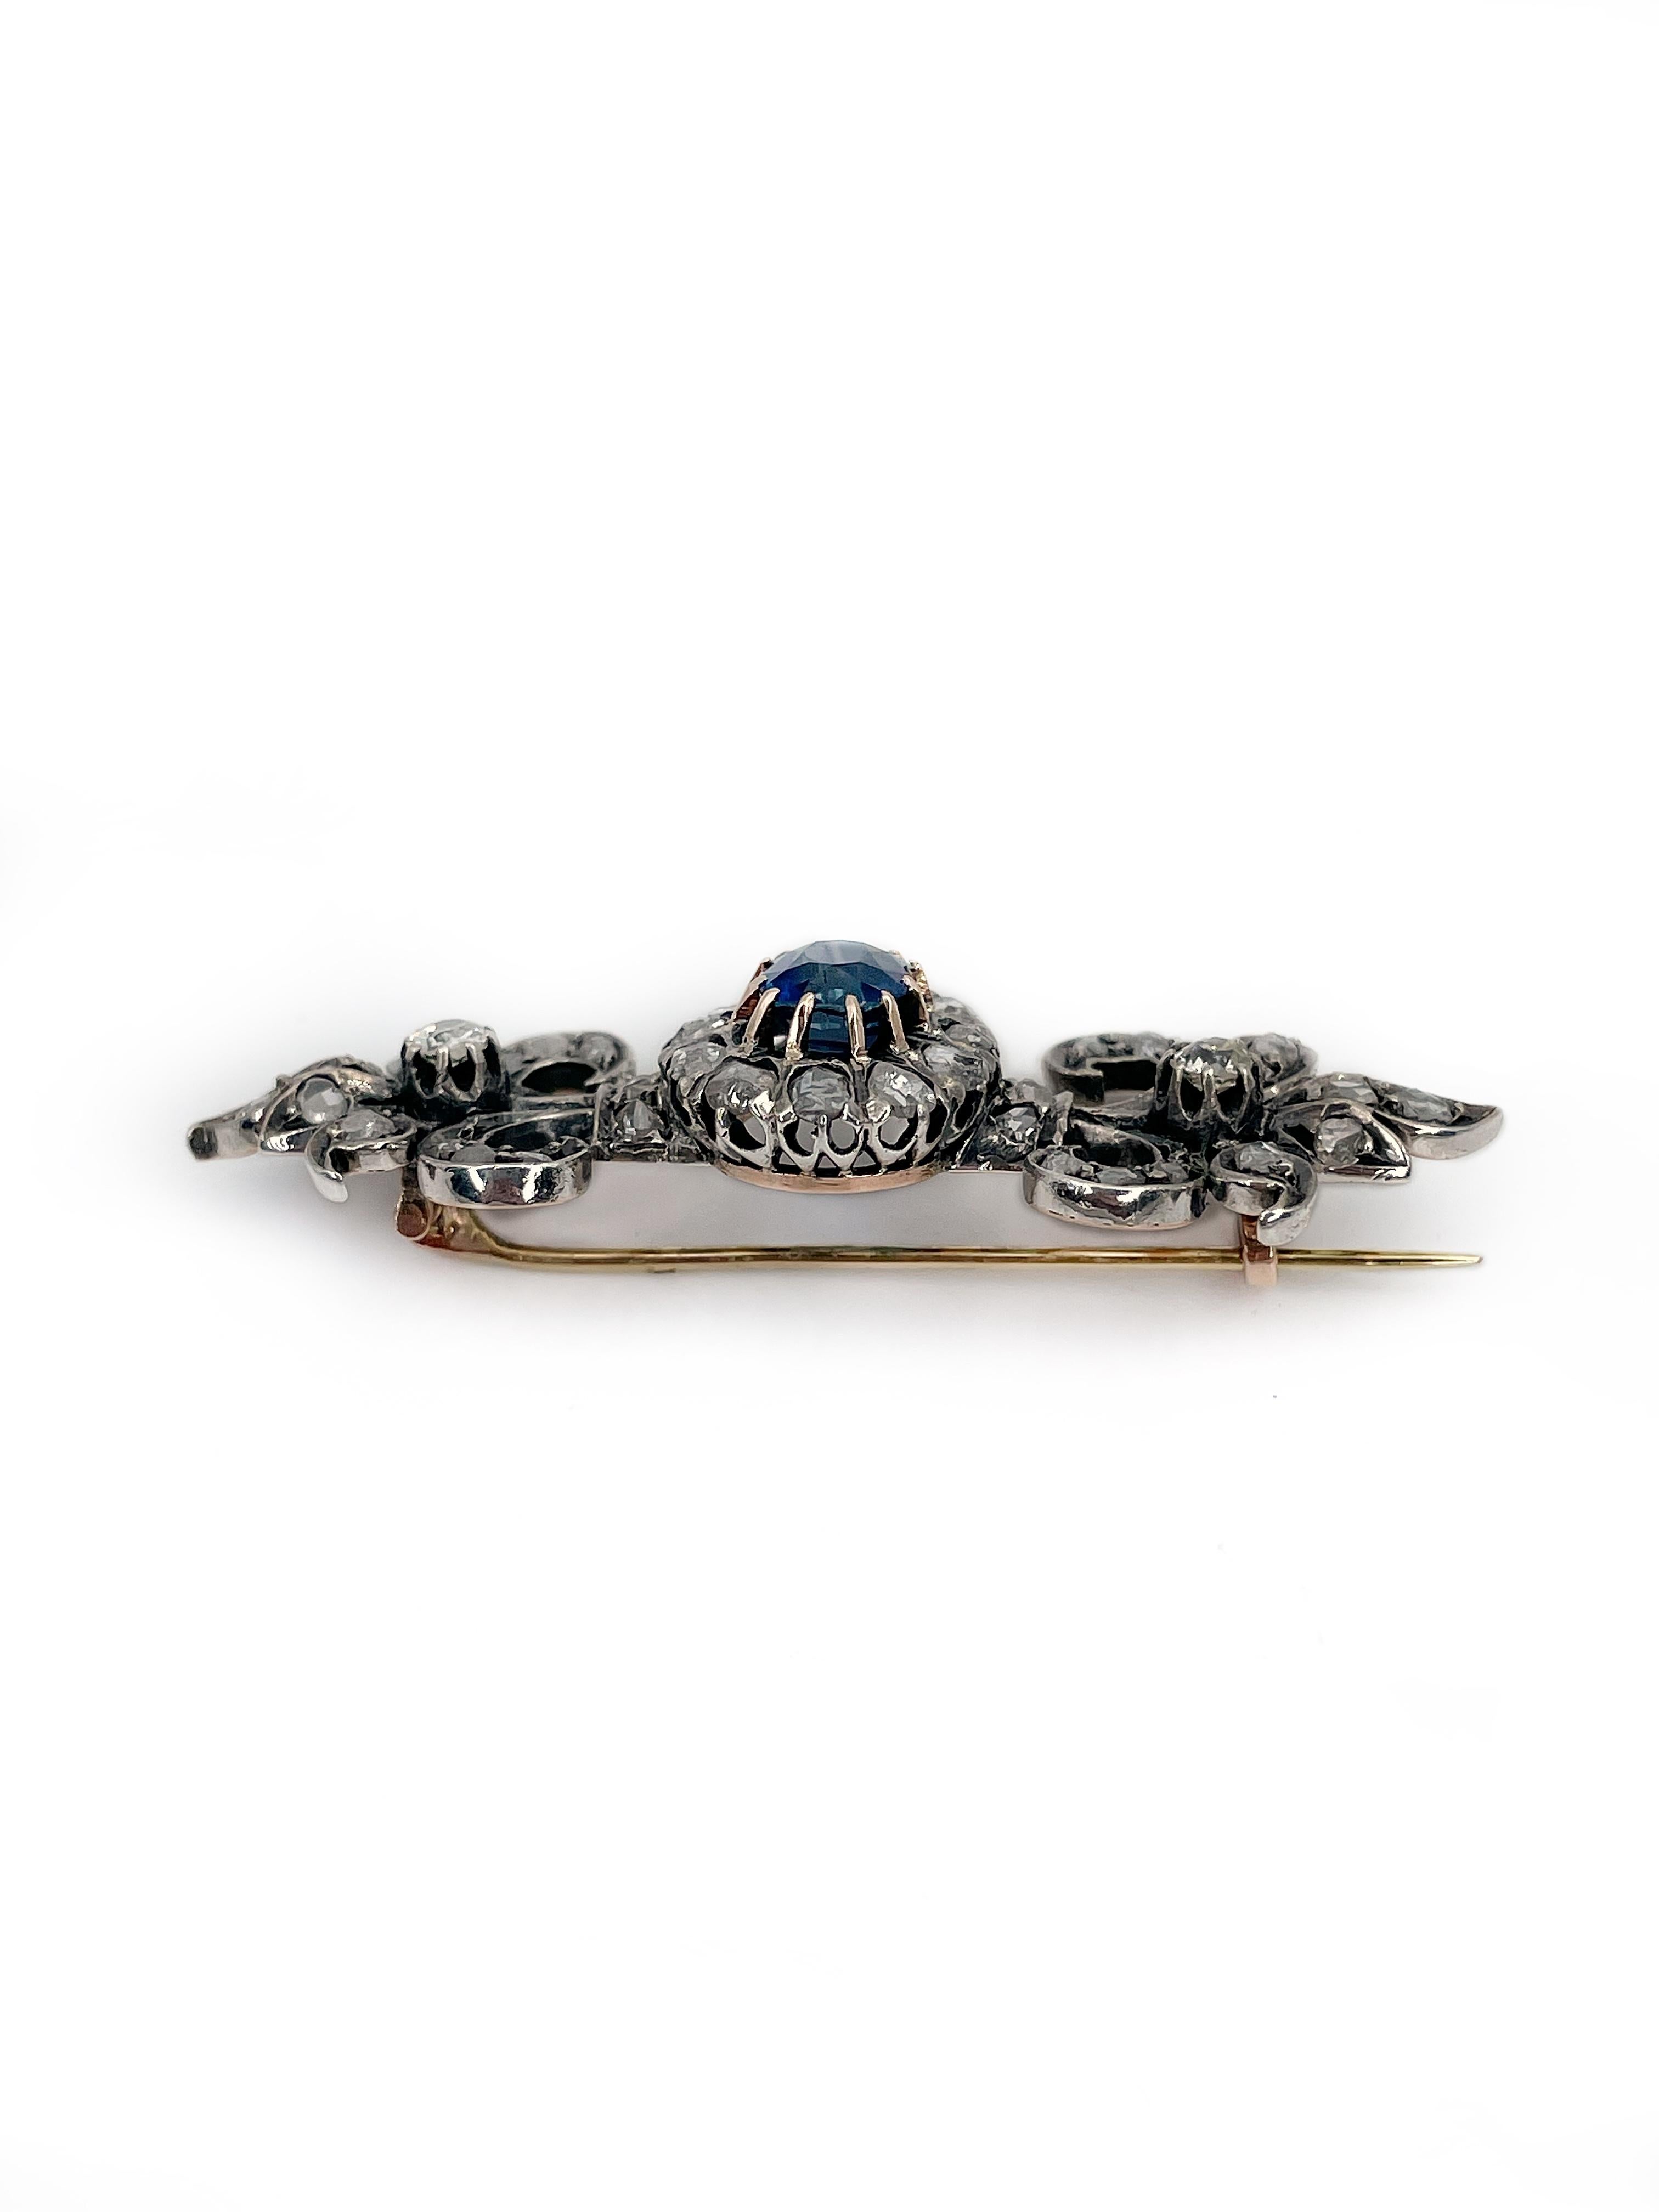 This is a magnificent Victorian Fleur-de-lis design pin brooch crafted in 18K gold. It is adorned with silver. The piece features oval natural blue sapphire in the center. The gem is accompanied by a mixture of old and rose cut diamonds.

Weight: